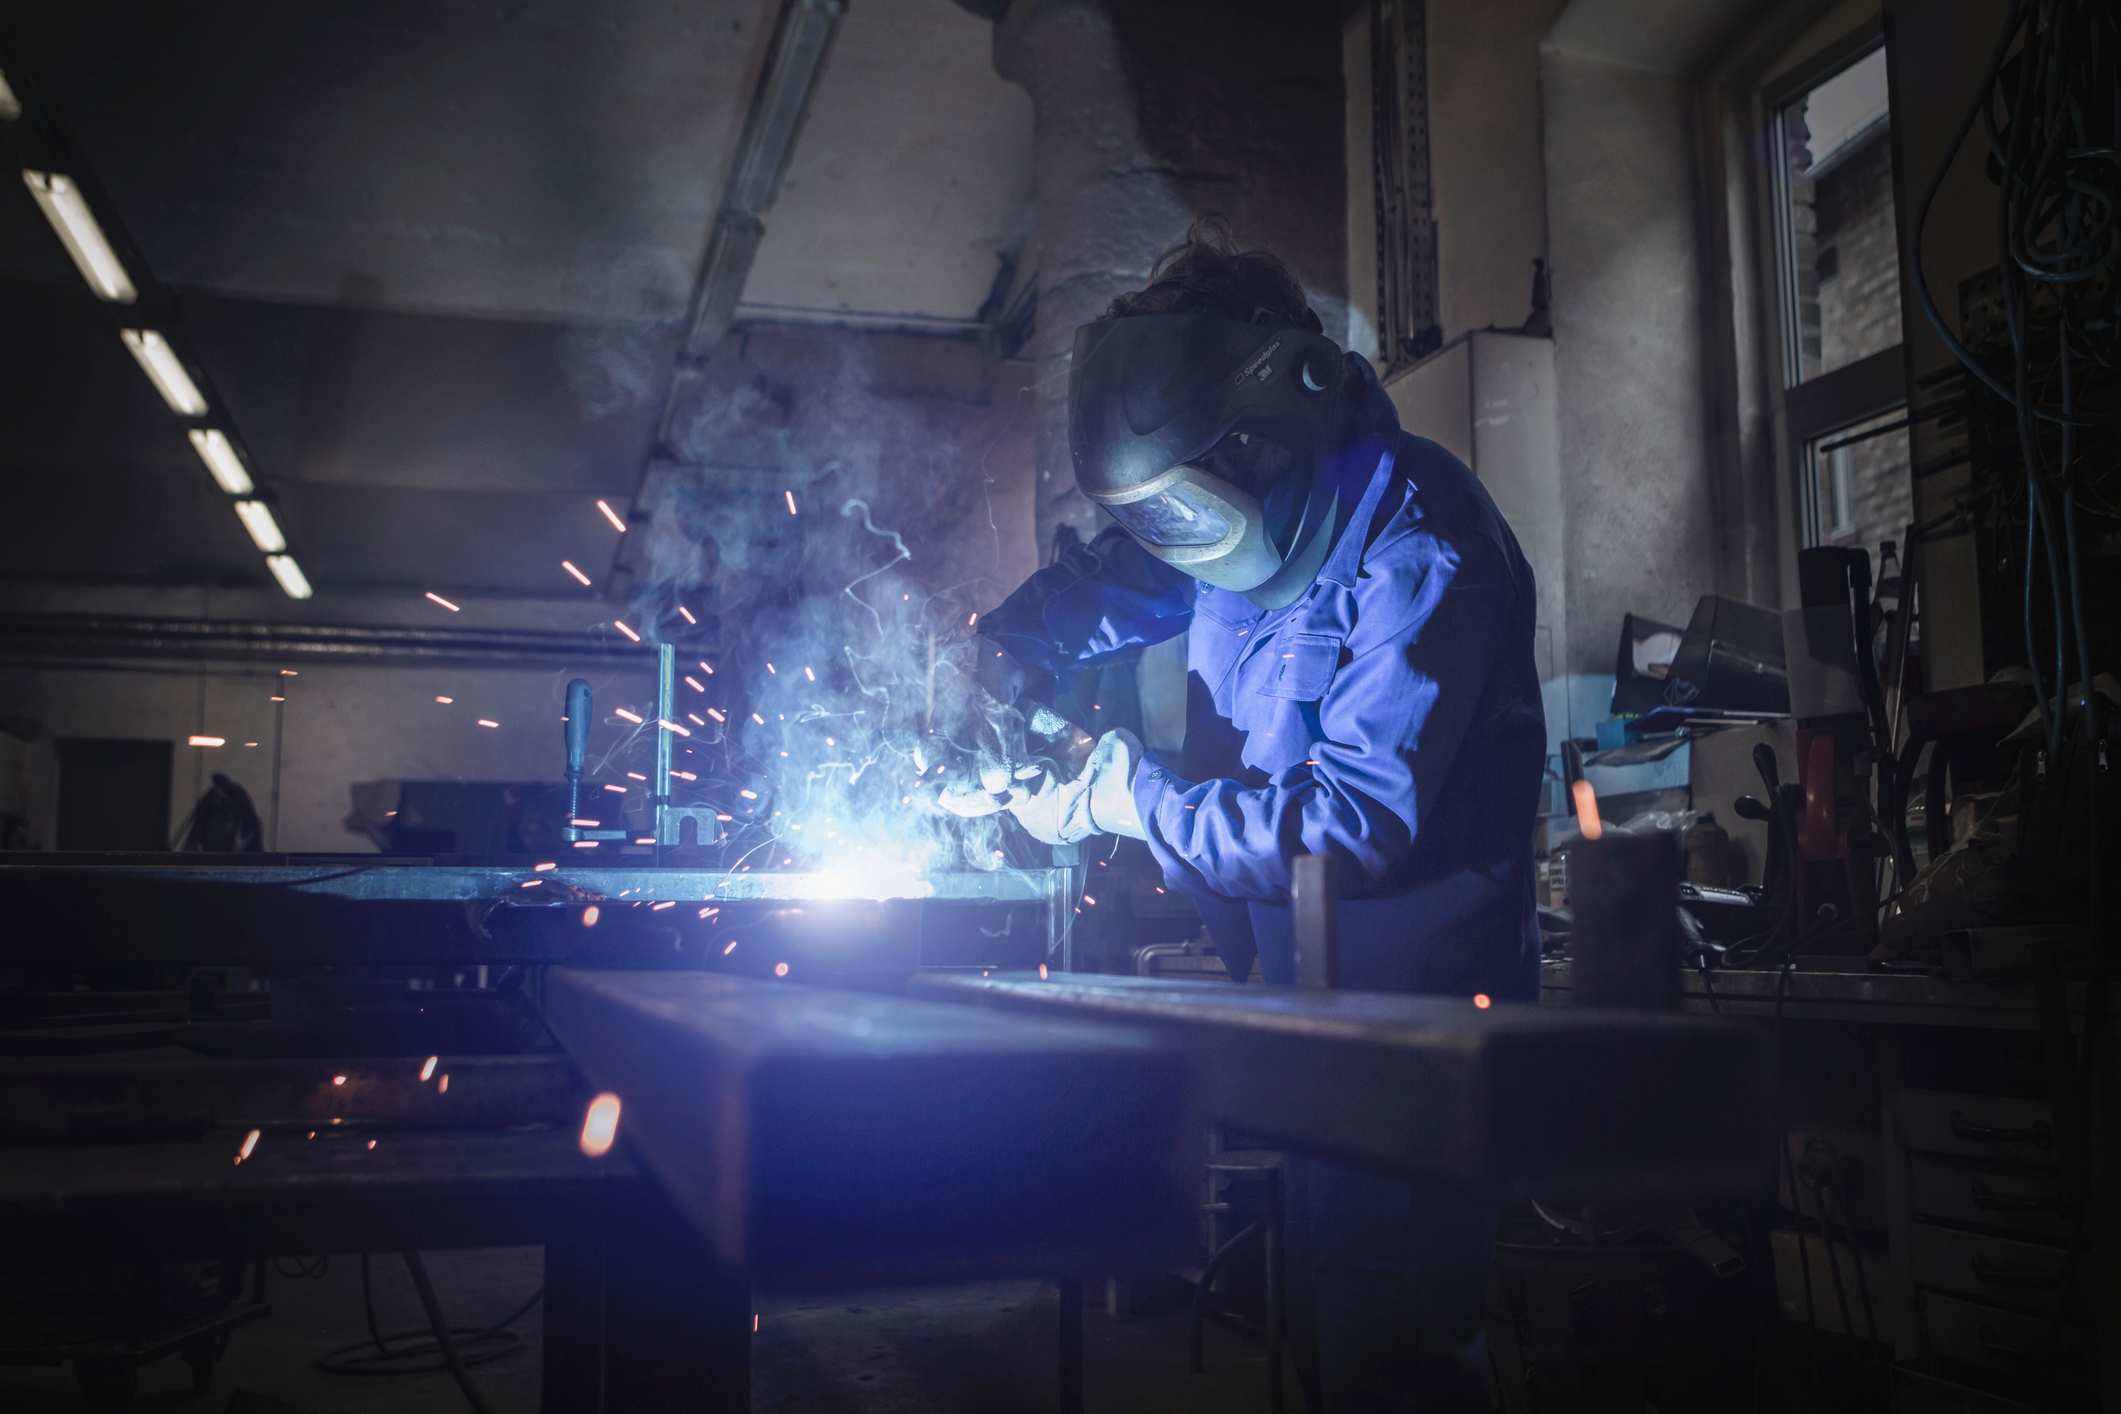 A person wearing a mask cutting metal with machinery